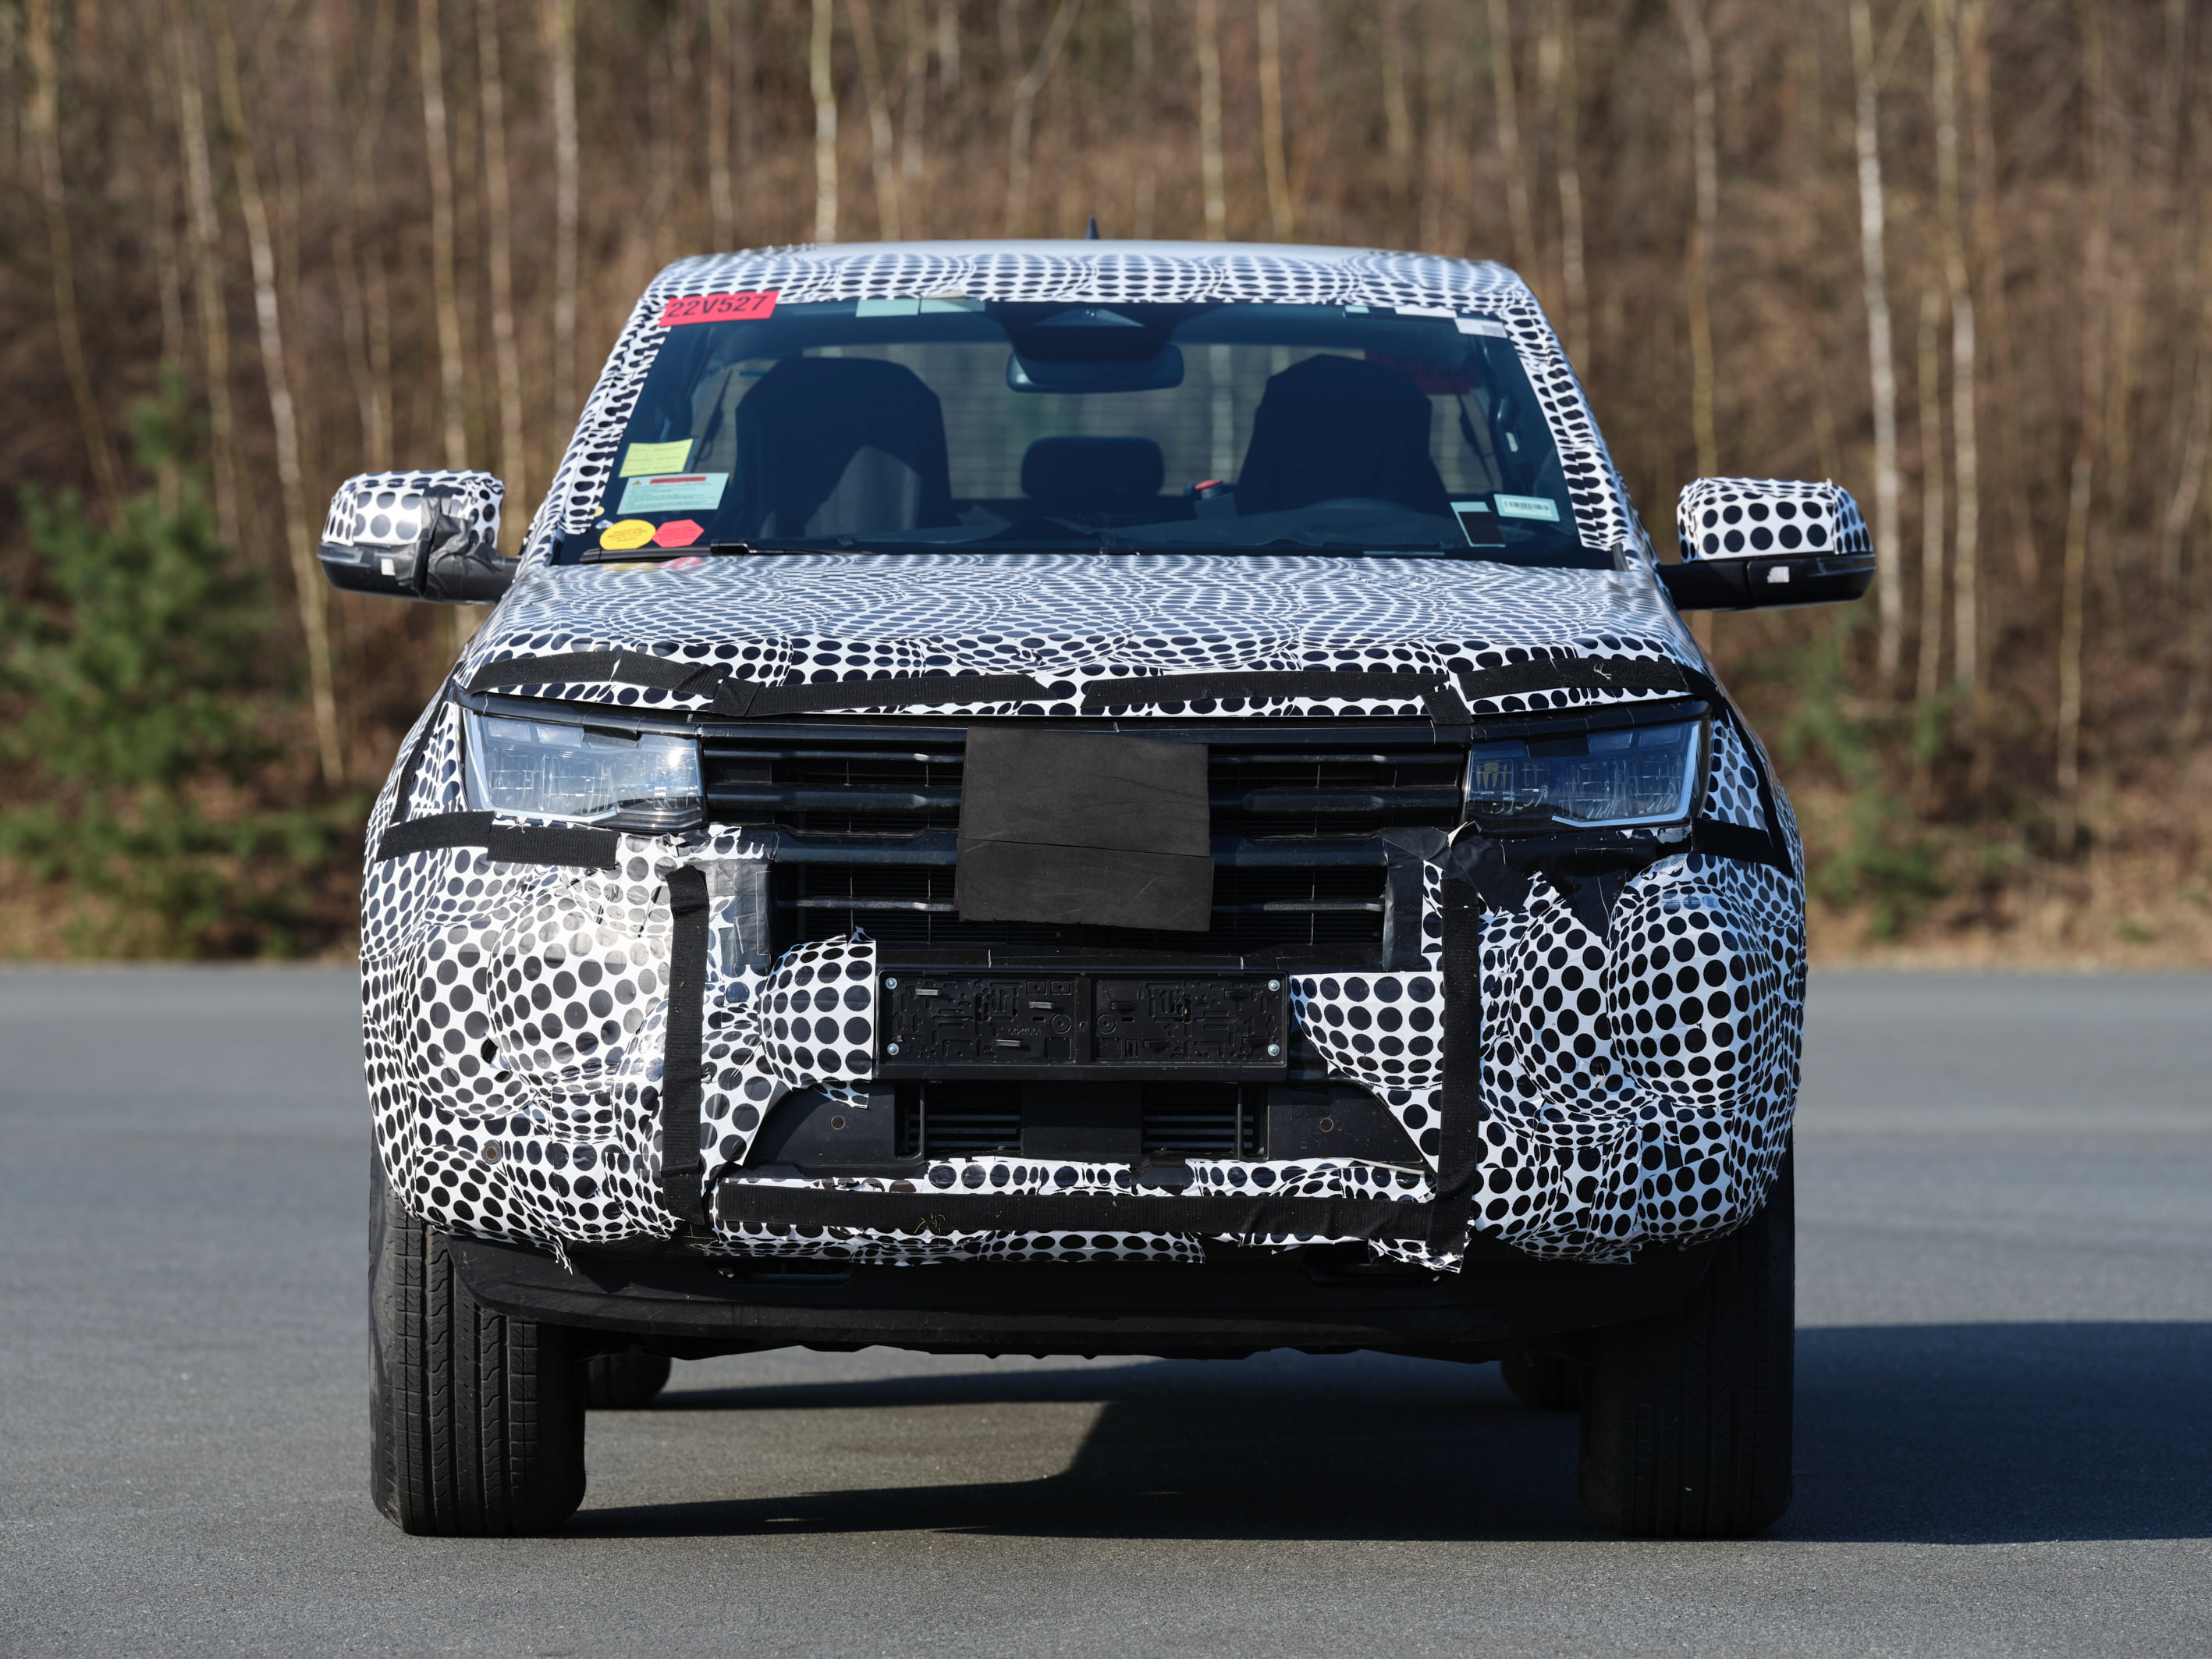 The Walkinshaw design team focused on making the Amarok V6 W-Series wider and more aggressive, with a completely redesigned front bumper, air intake grille, wheel arch flares, and a unique forged aluminium 20-inch 'Clayton' alloy wheel fitted with Pirelli scorpion ATR tyres.